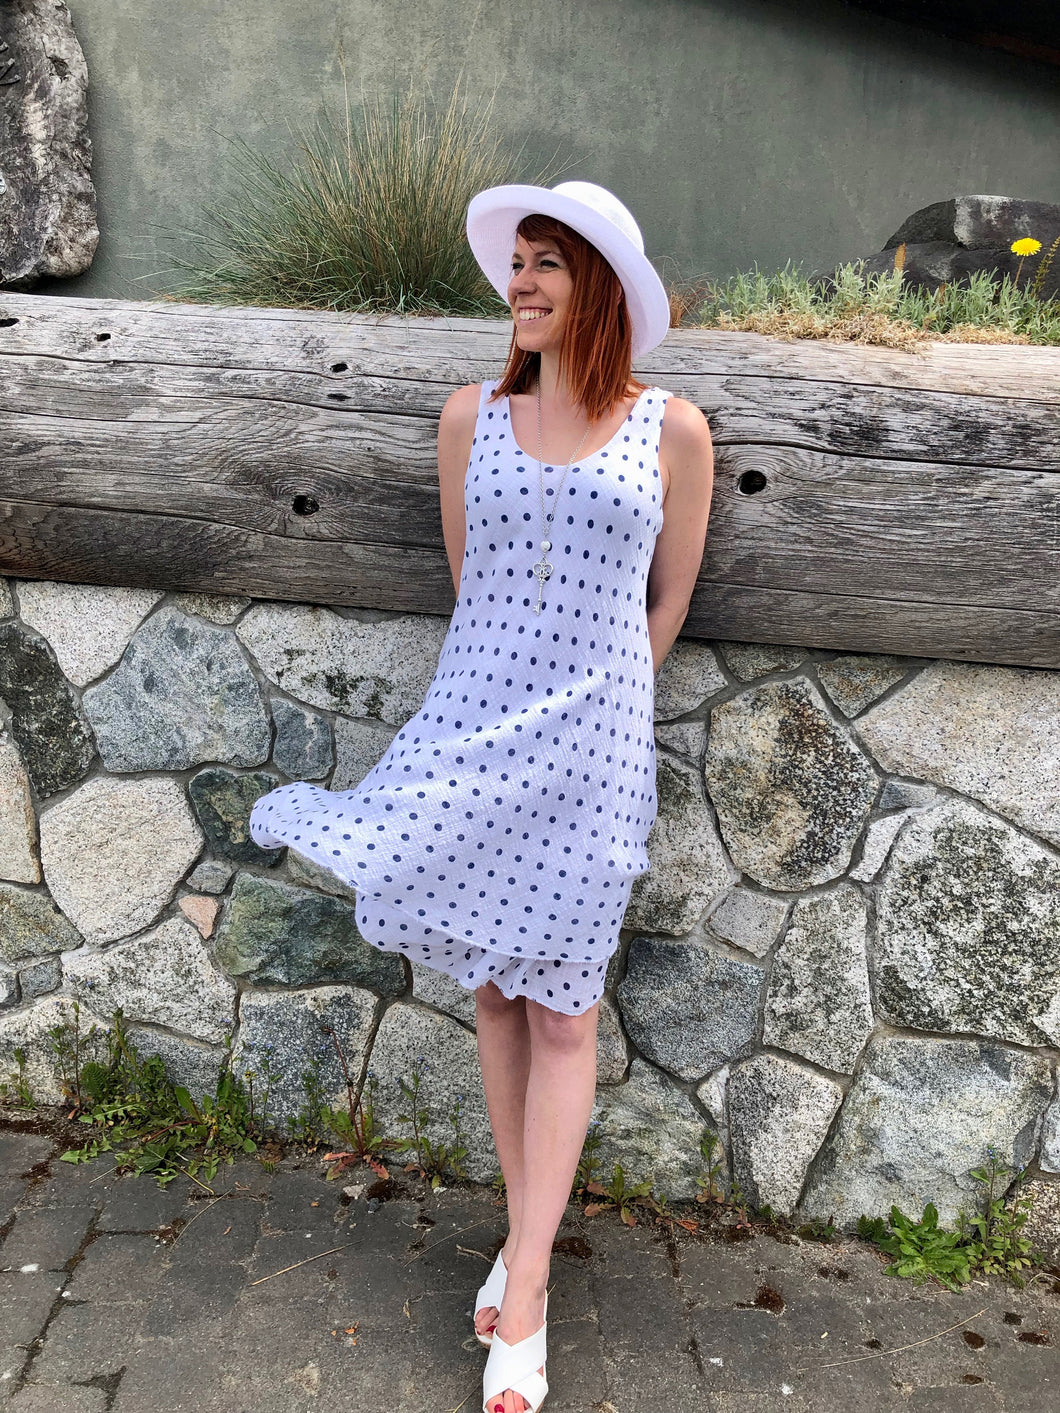 Cotton Polka Dot Dress, Fits to a T, BC, Canada